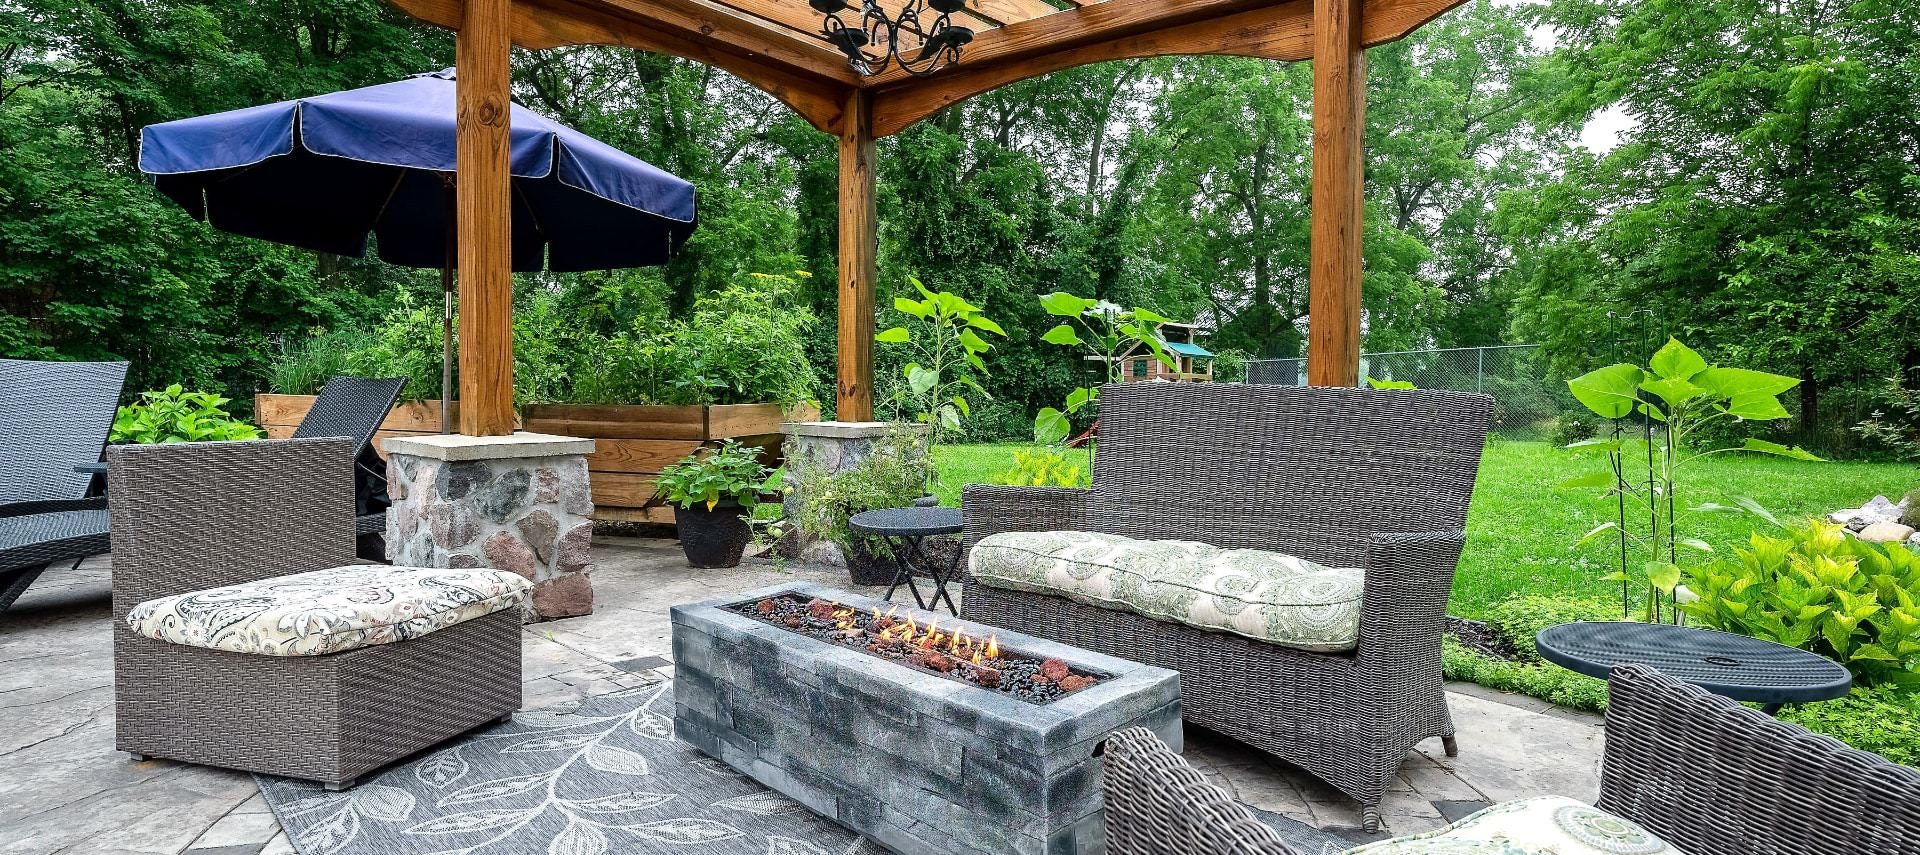 Concrete patio with gray wicker patio furniture, fire pit, and wooden pergola surrounded by green trees and grass